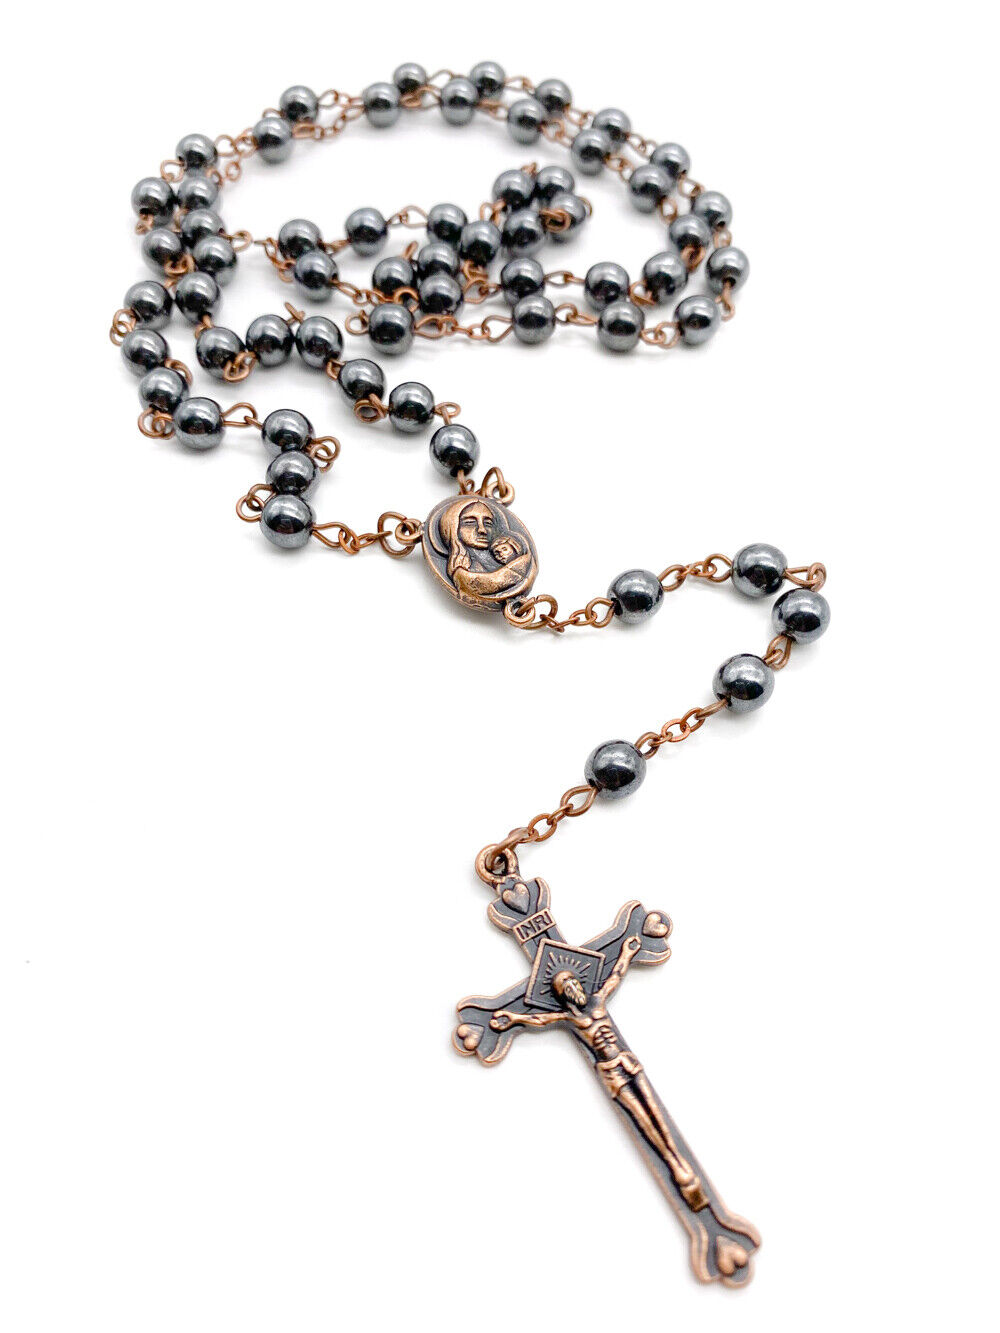 Hematite Rosary Beads Black Catholic Necklace Anqiue Holy Mary Soil Medal Cross